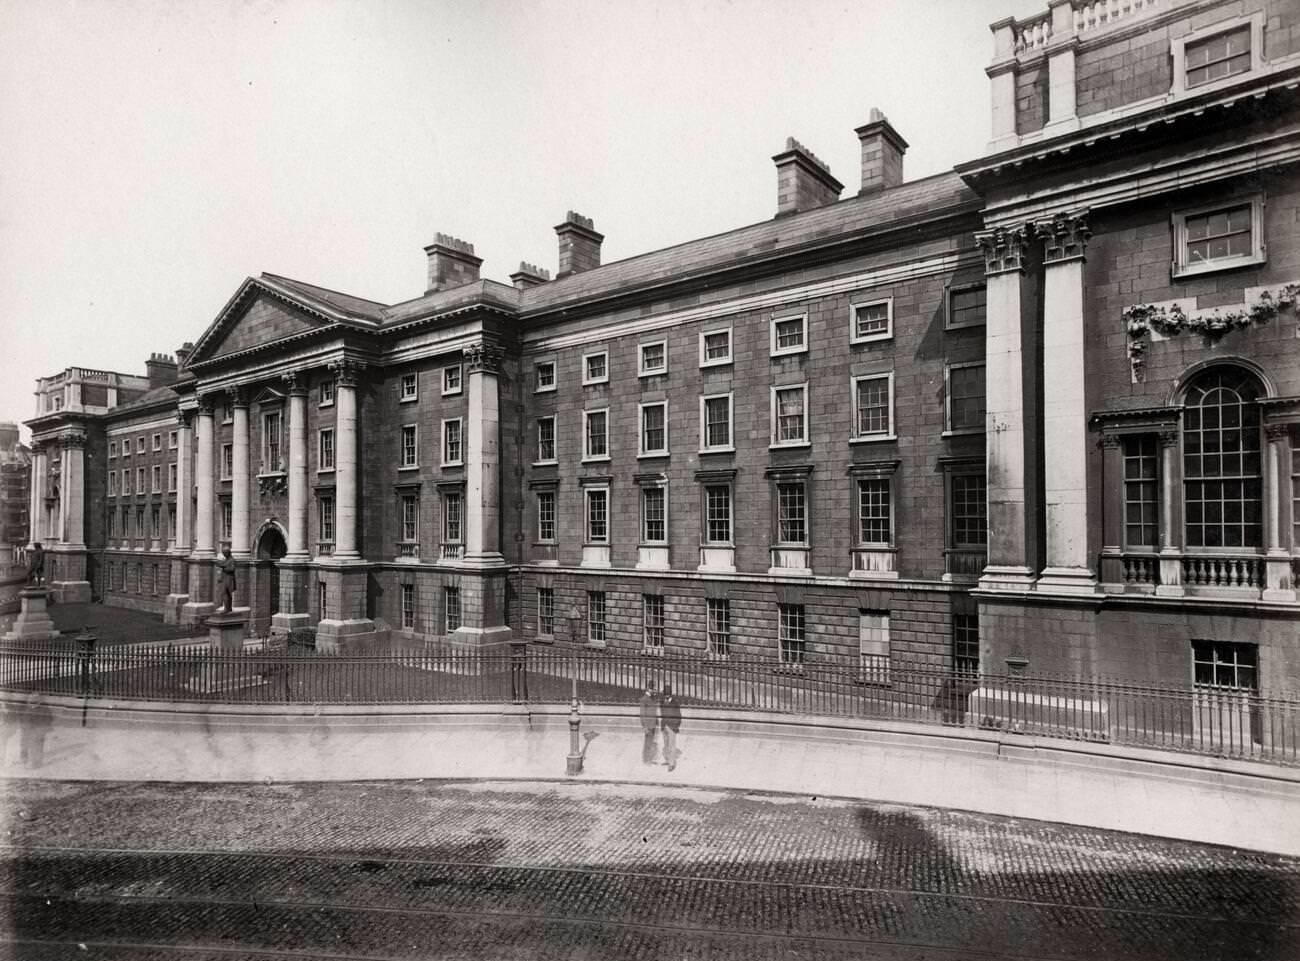 View of the facade of Trinity College Dublin.